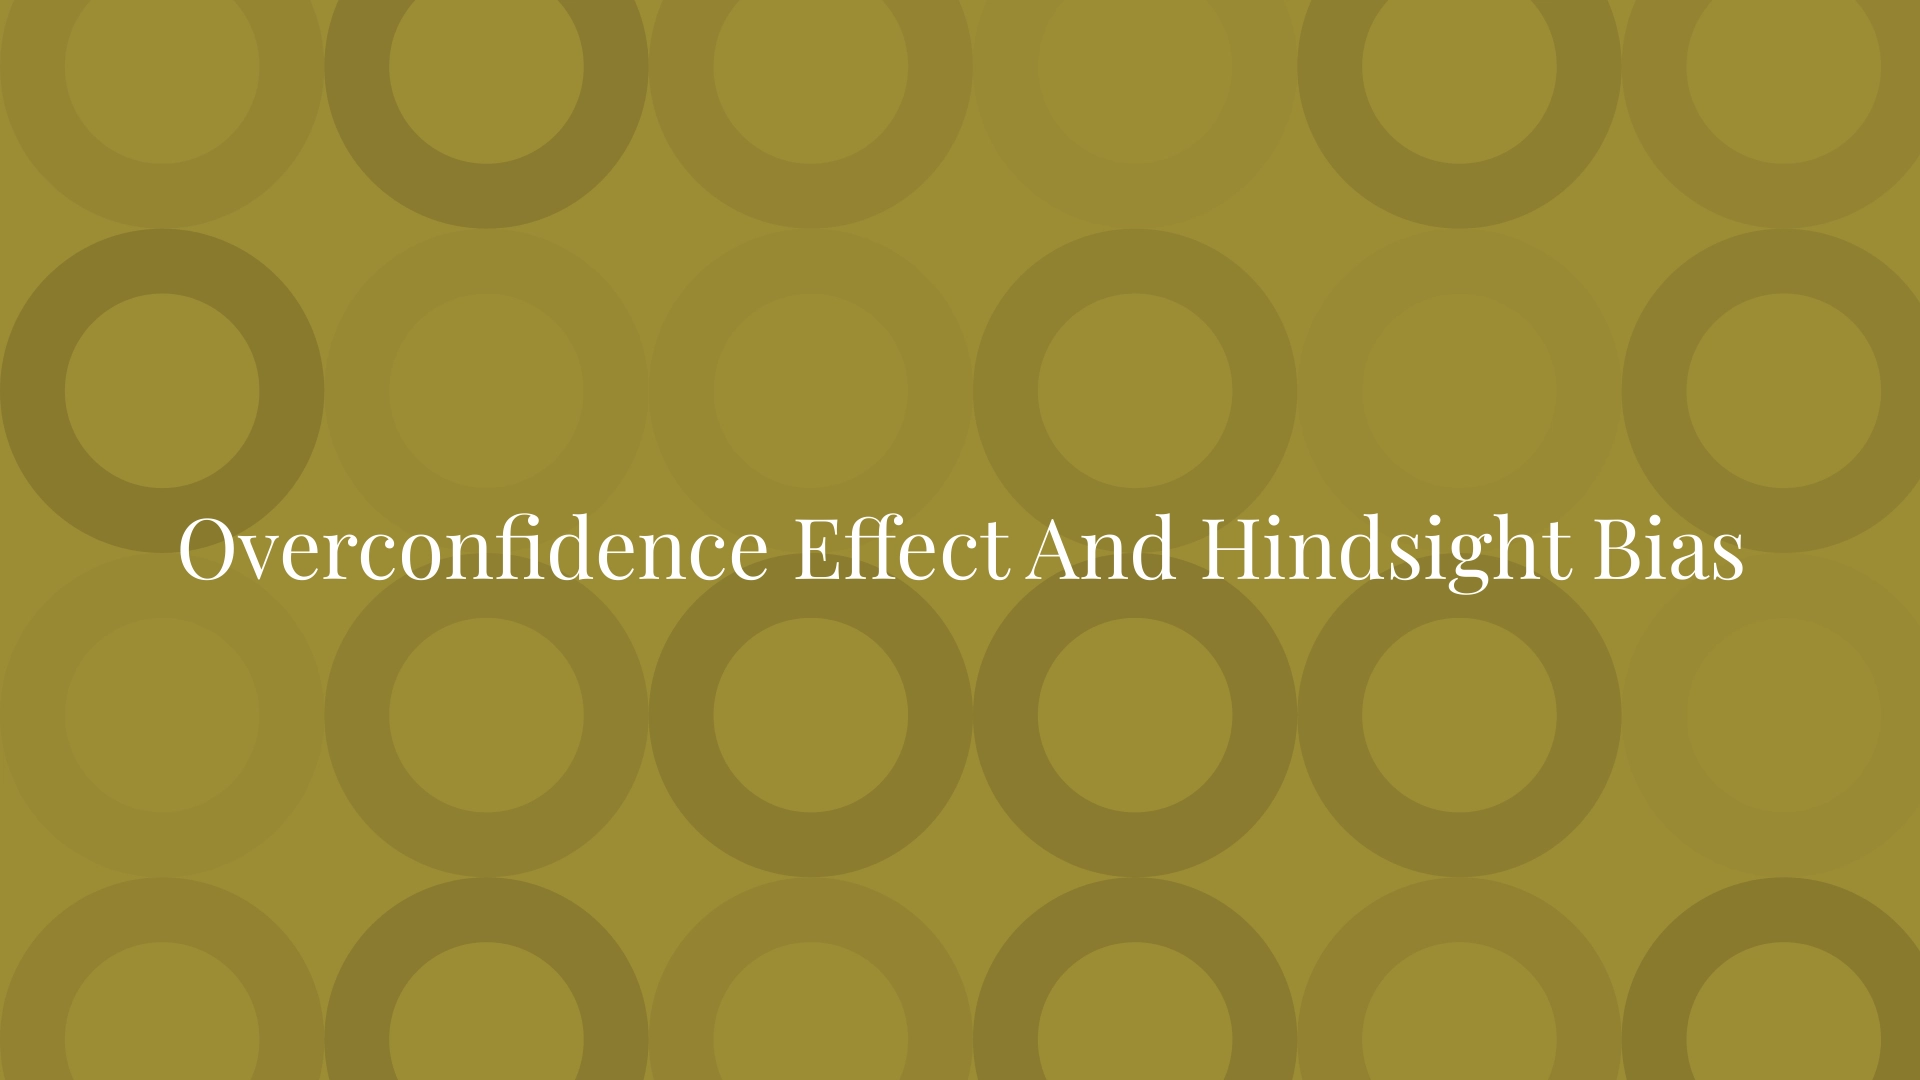 Overconfidence Effect And Hindsight Bias